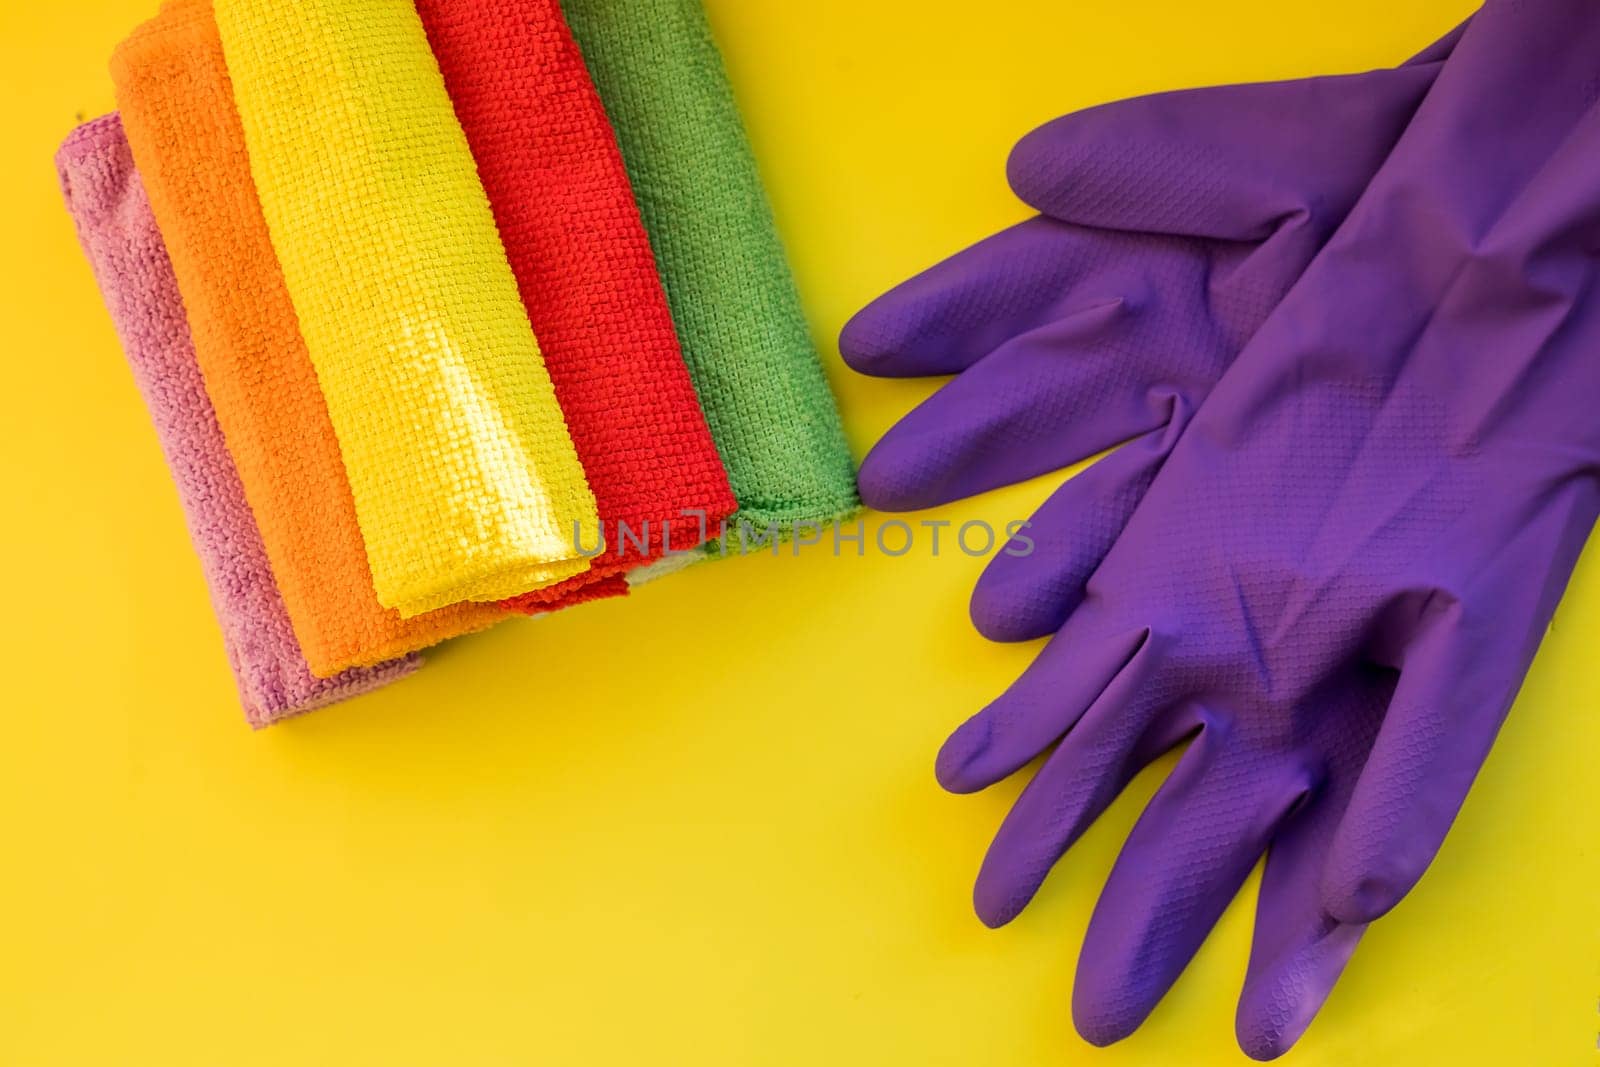 House cleaning products on yellow table. cleaning supplies.Rubber protective gloves and colorful microfiber cleaning cloths .Copy space by YuliaYaspe1979